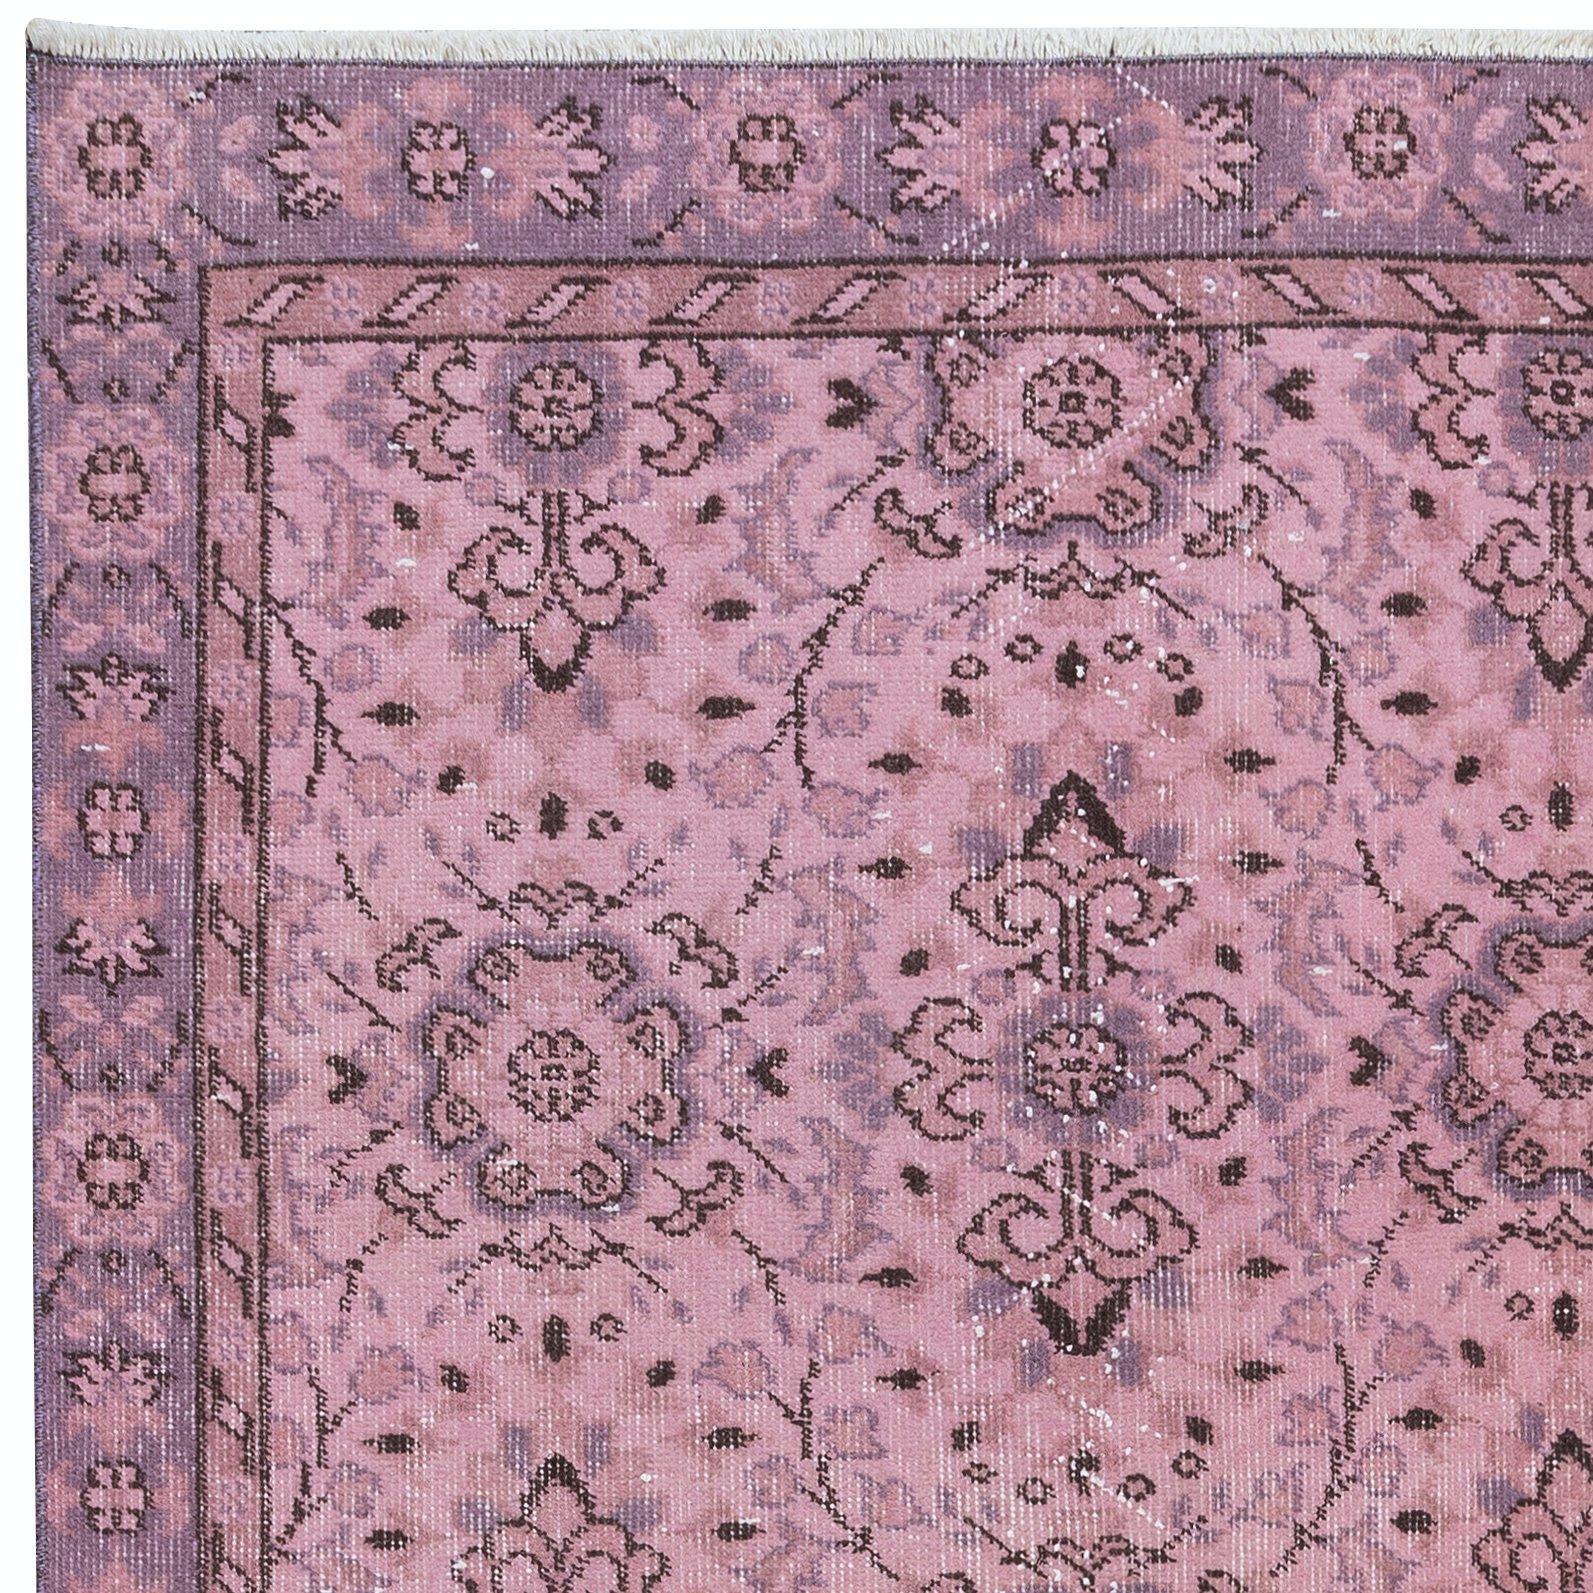 Turkish 3.5x6.6 Ft Modern Handmade Pink Rug with Rustic Italian Mediterranean Style For Sale